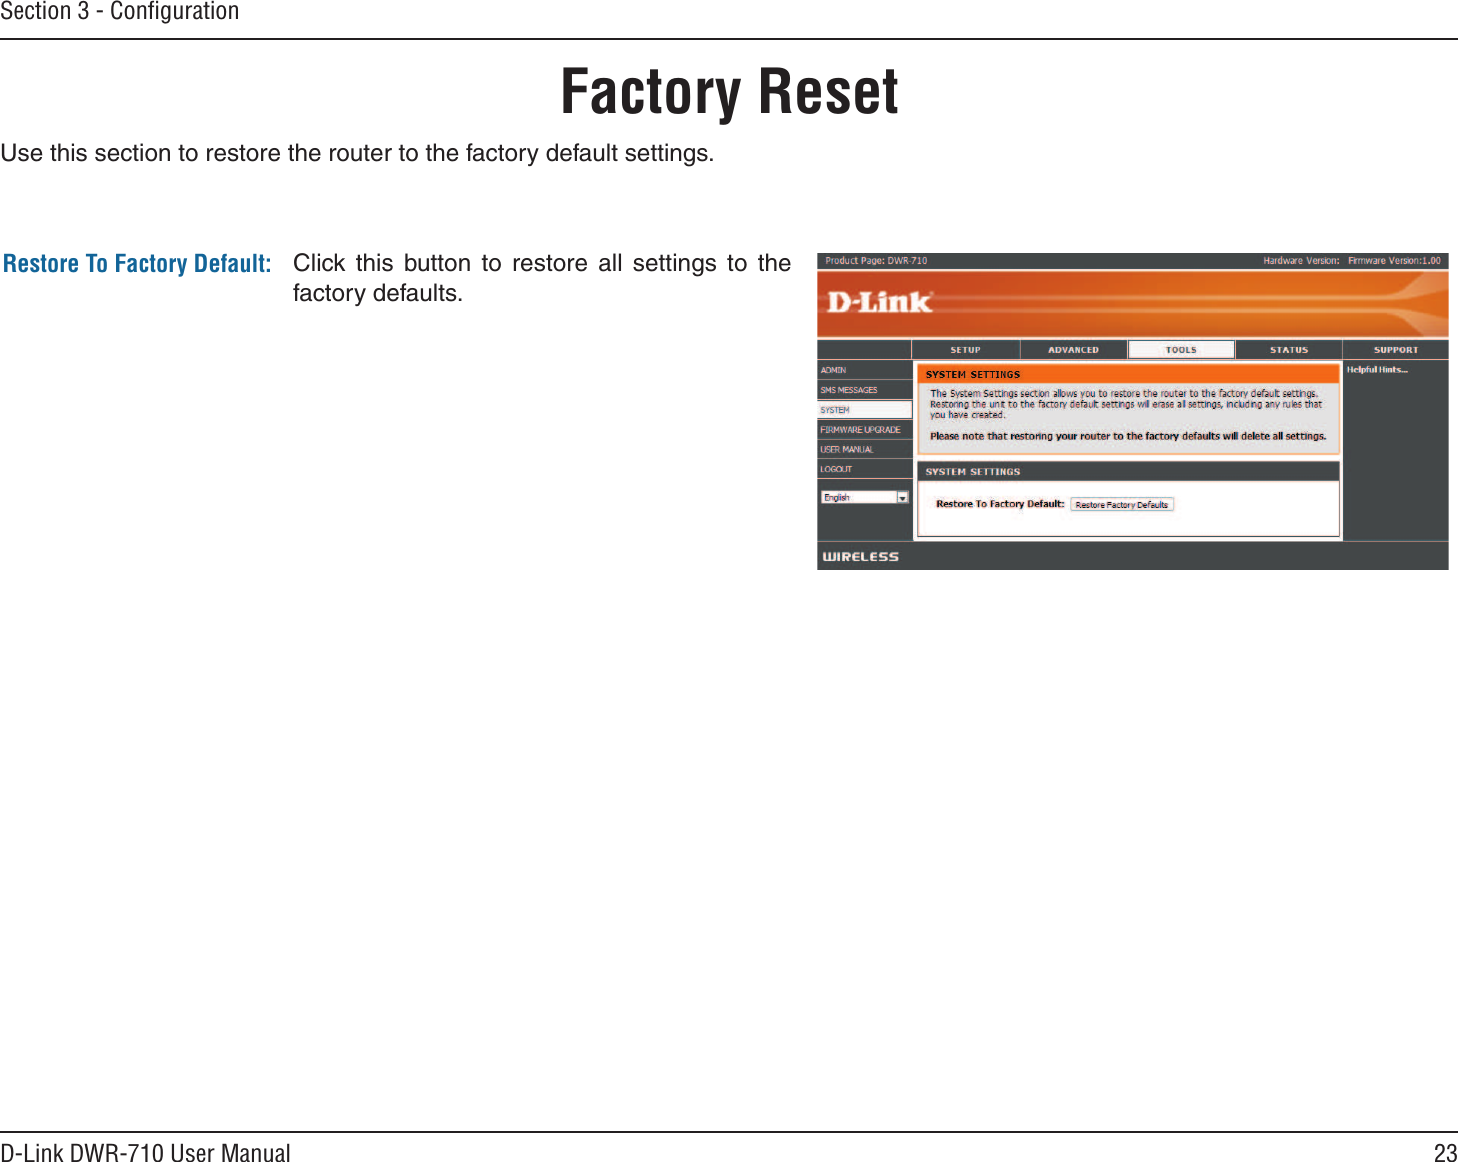 23D-Link DWR-710 User ManualSection 3 - ConﬁgurationFactory ResetClick  this  button  to  restore  all  settings  to  the factory defaults.Restore To Factory Default:Use this section to restore the router to the factory default settings.